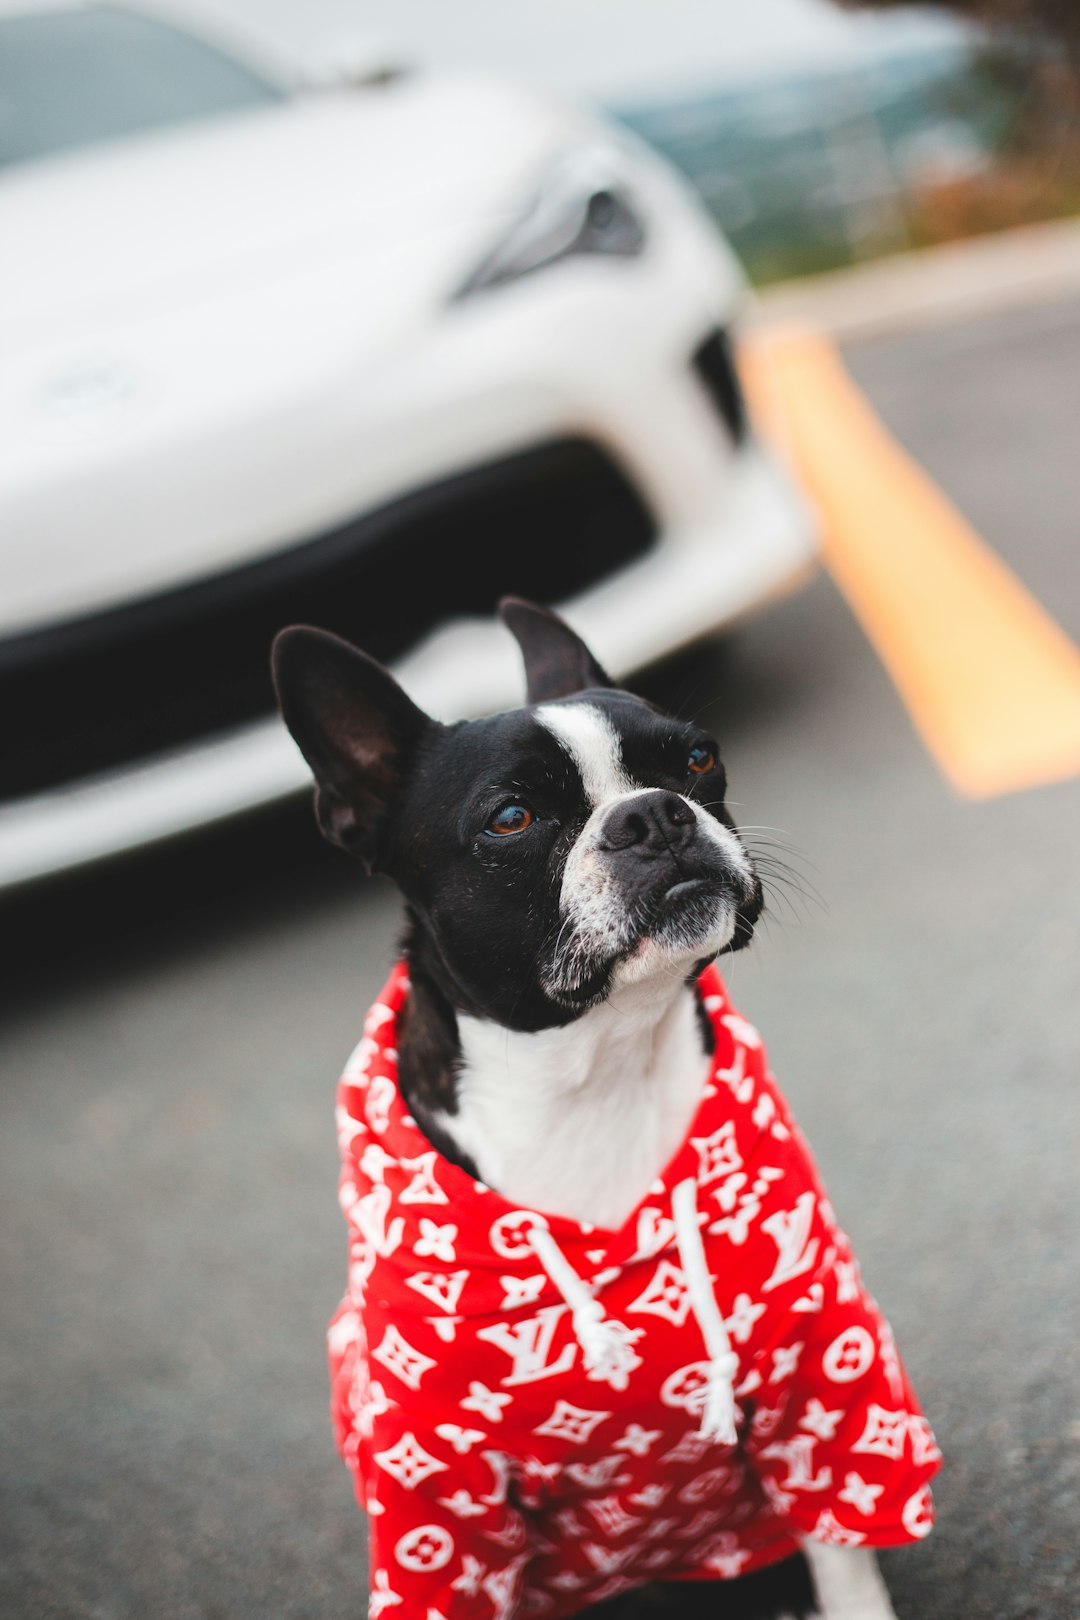 black and white boston terrier wearing red and white polka dot shirt